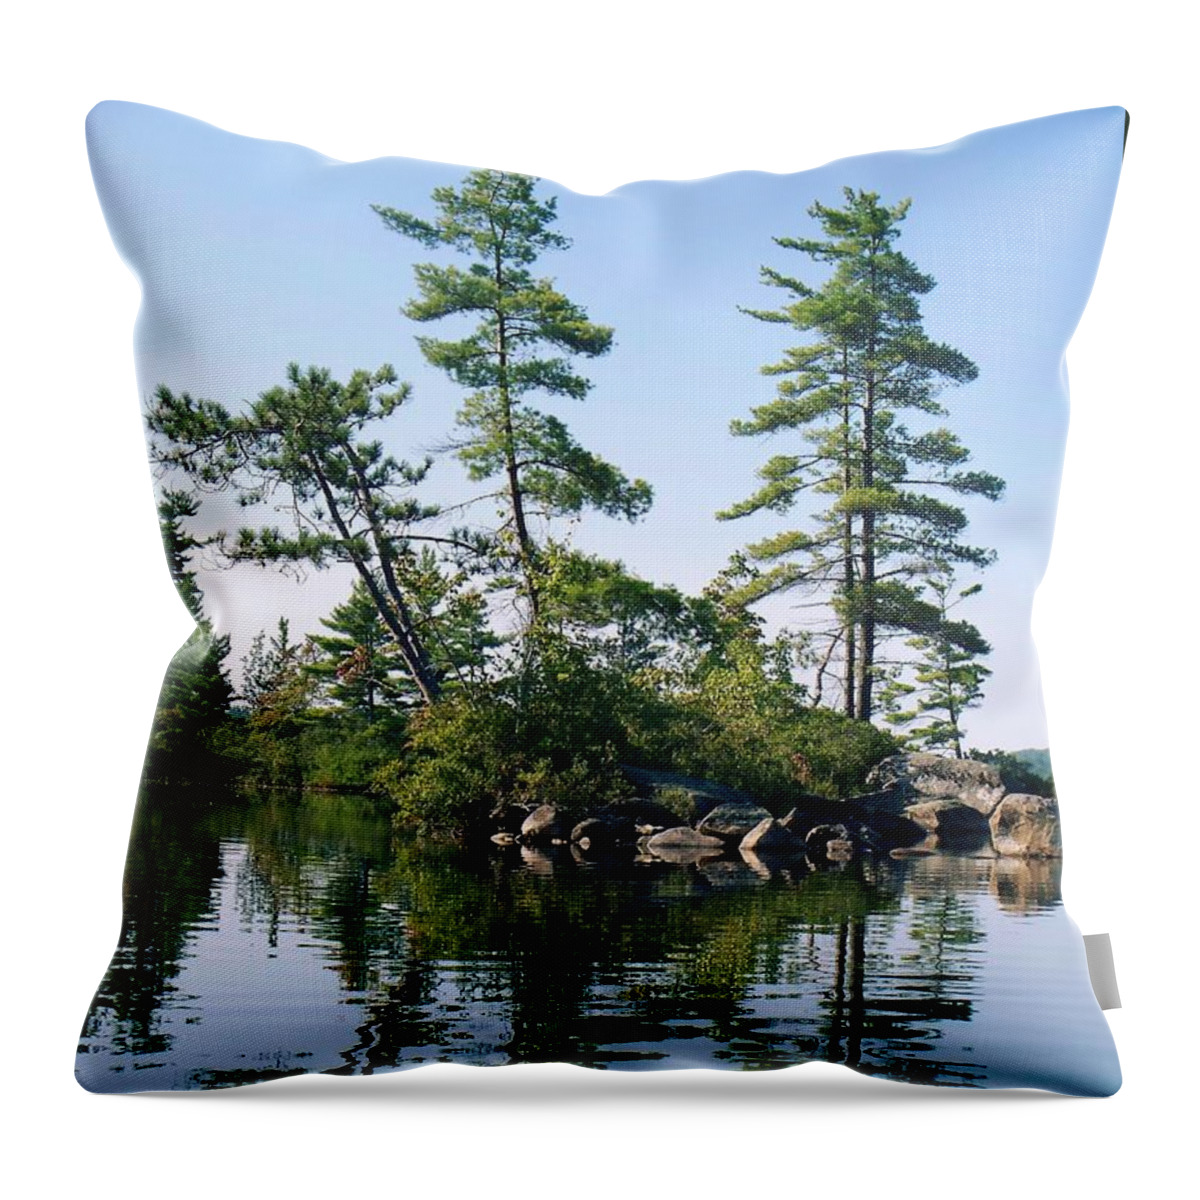  Throw Pillow featuring the photograph Little Rocky Pine Tree Island On Parker Pond by Joy Nichols